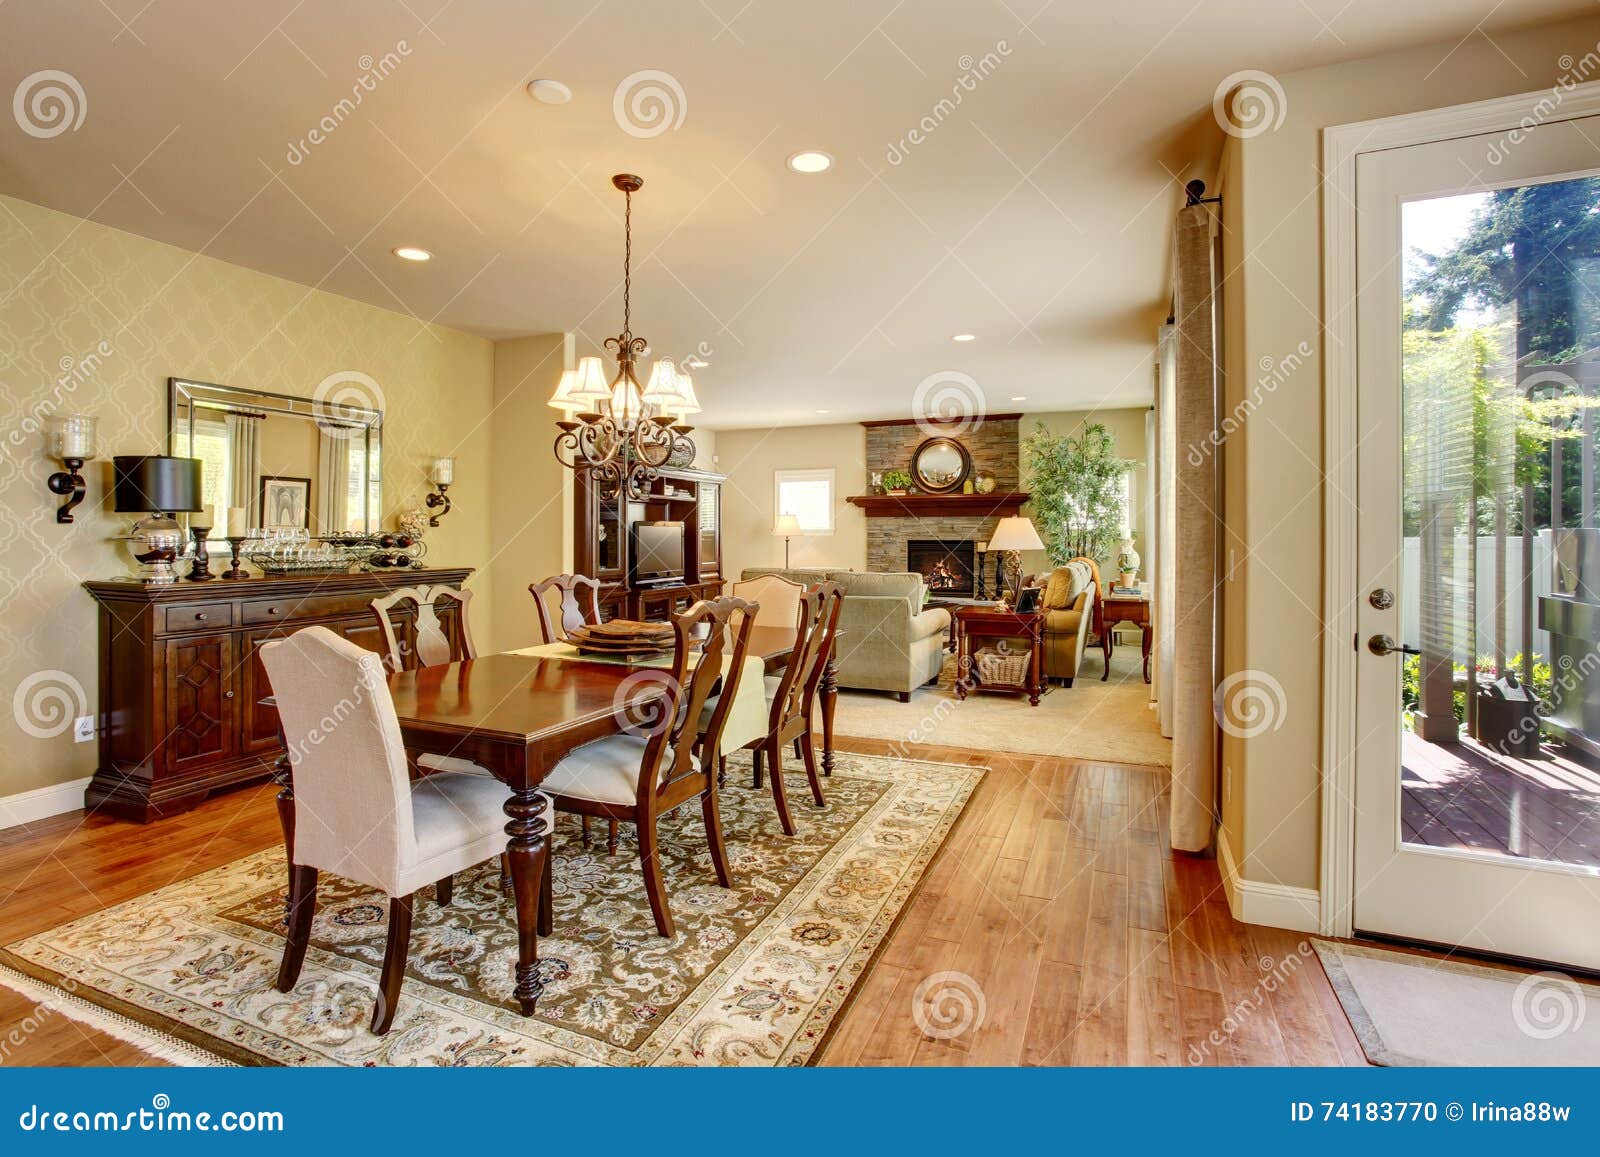 2 286 Dining Rug Table Photos Free Royalty Free Stock Photos From Dreamstime